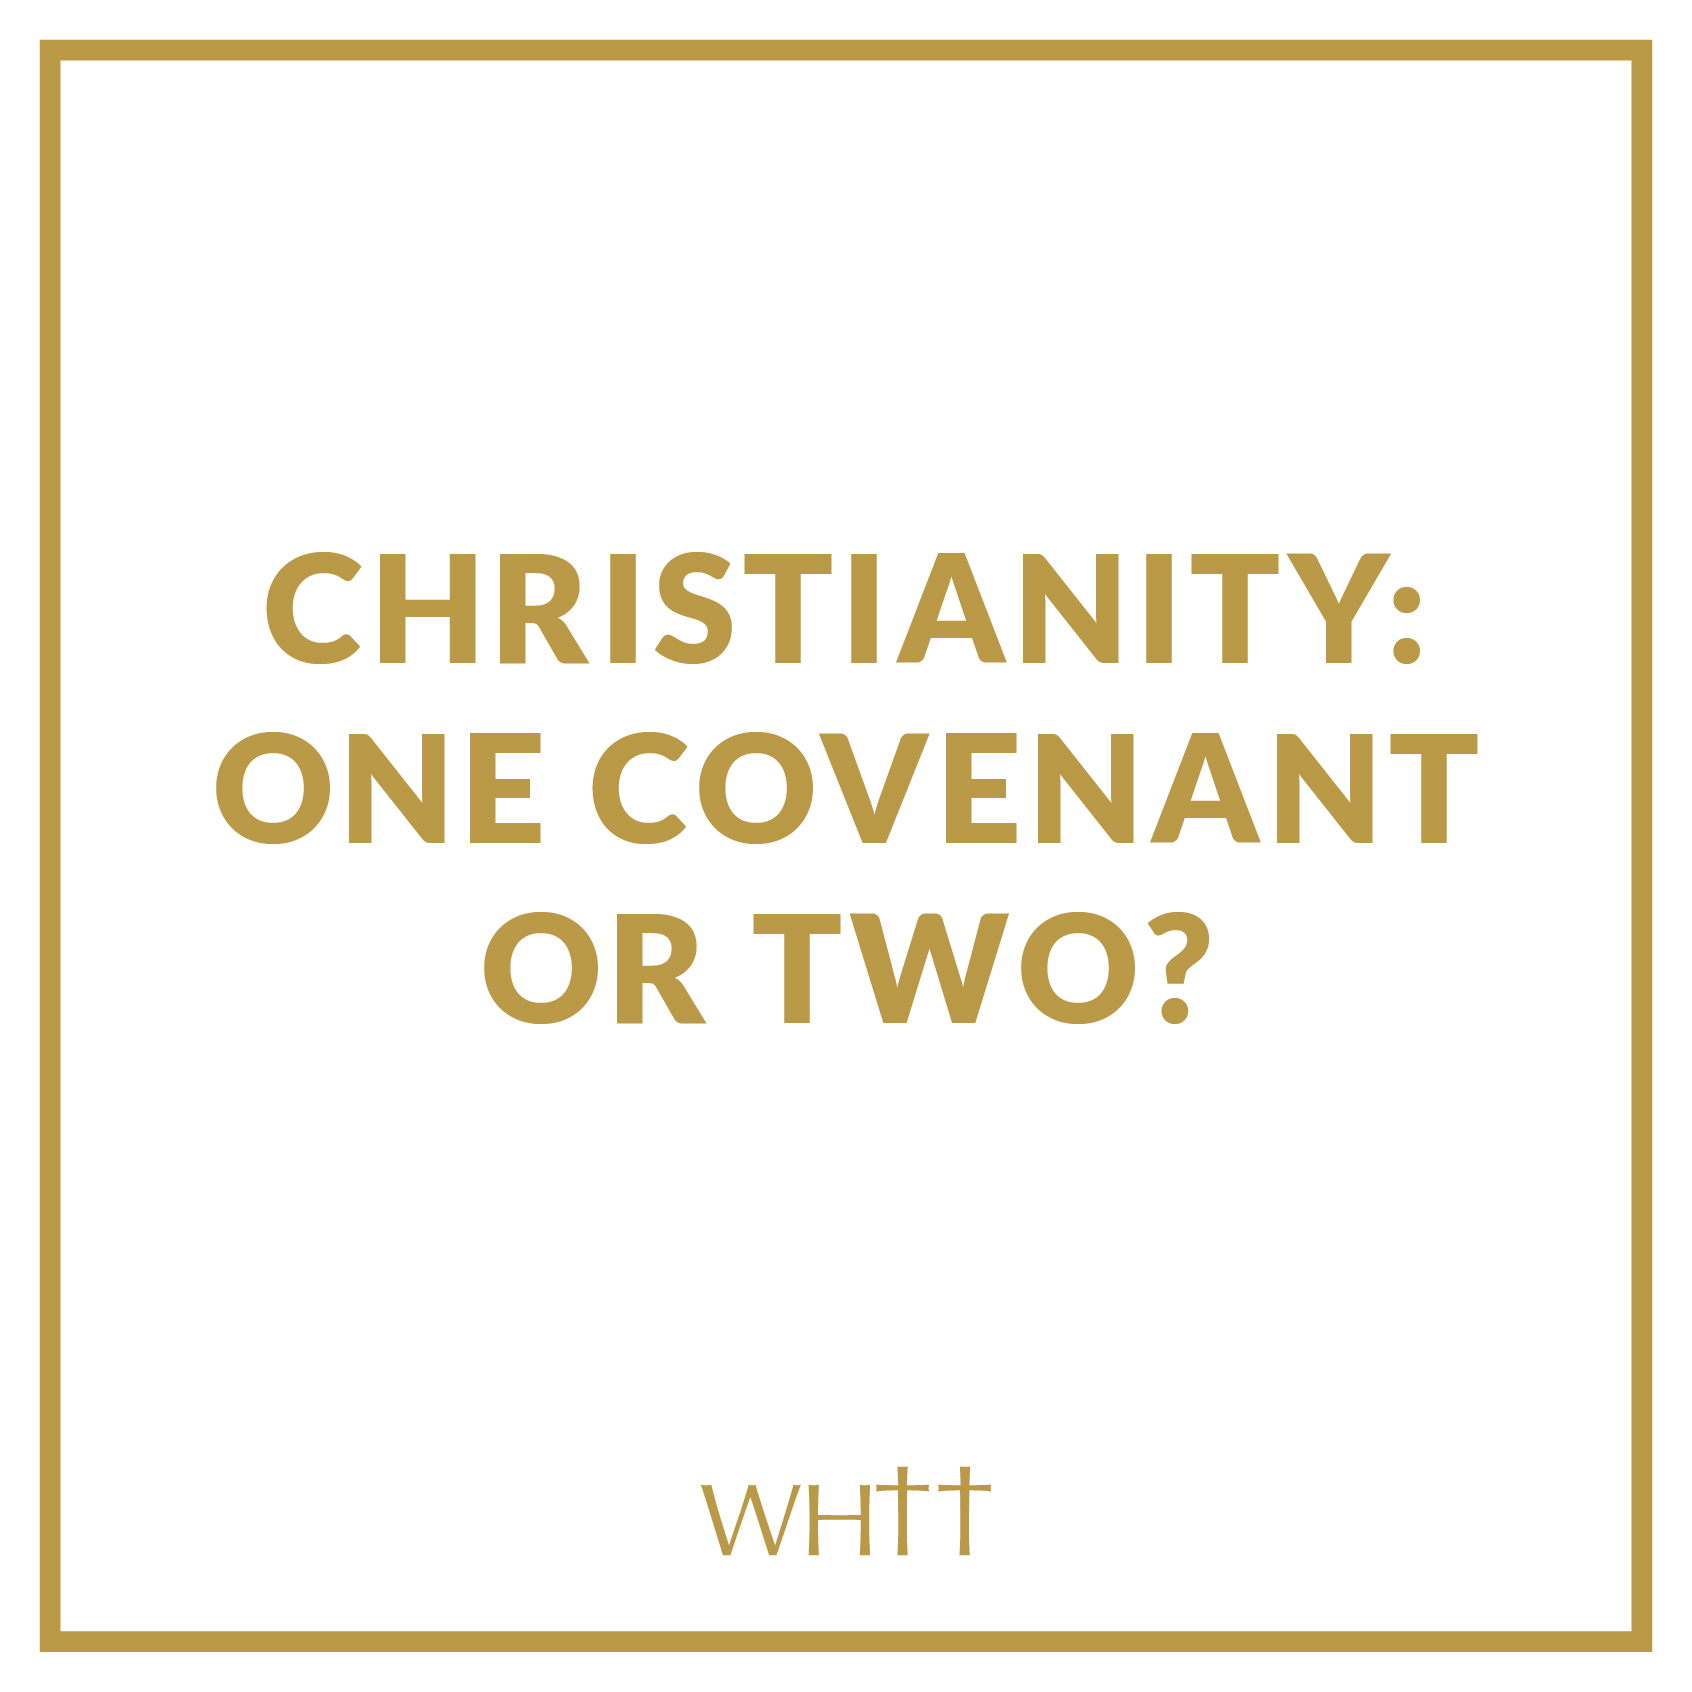 Christianity: One Covenant or Two?